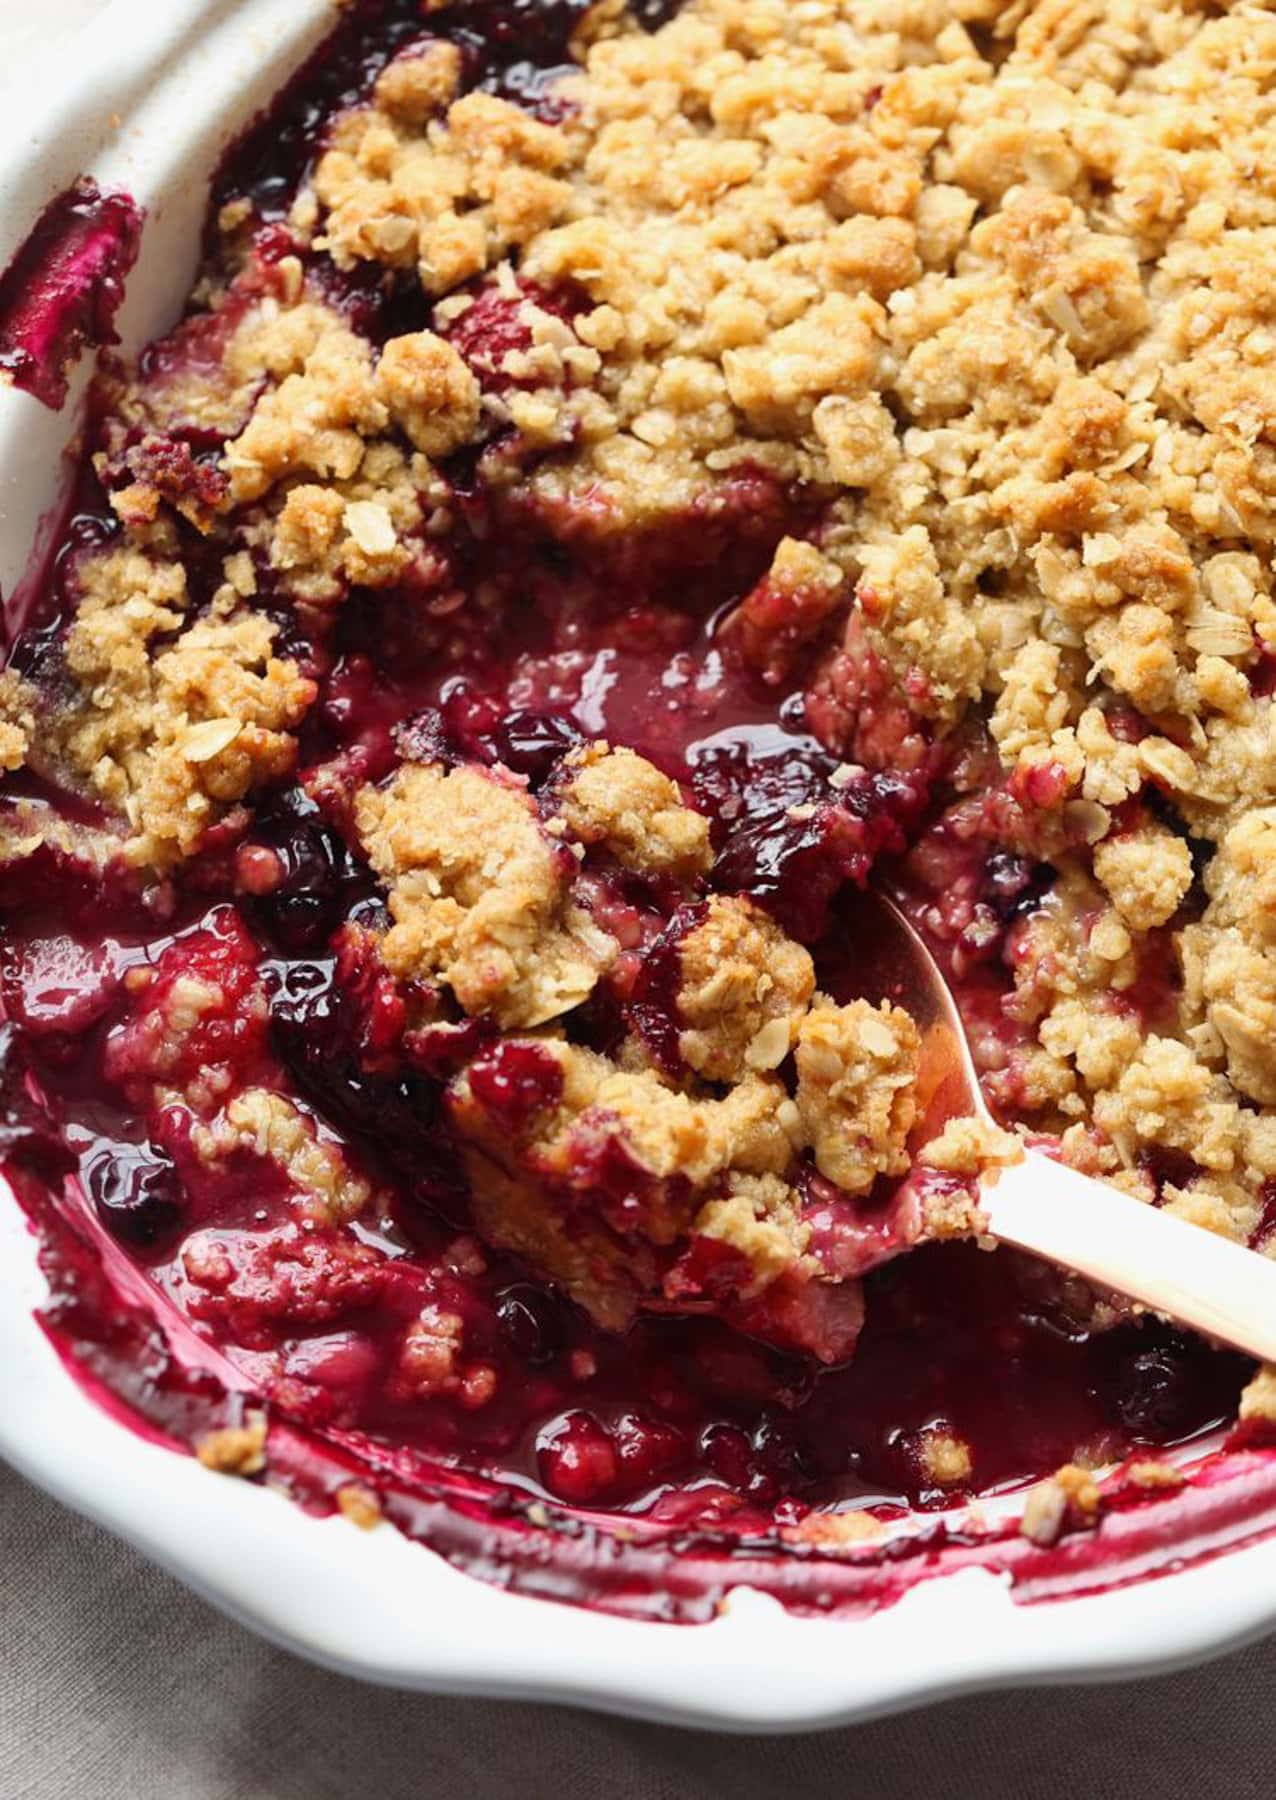 Mixed Berry Crisp Recipe topped with a buttery oat crumble